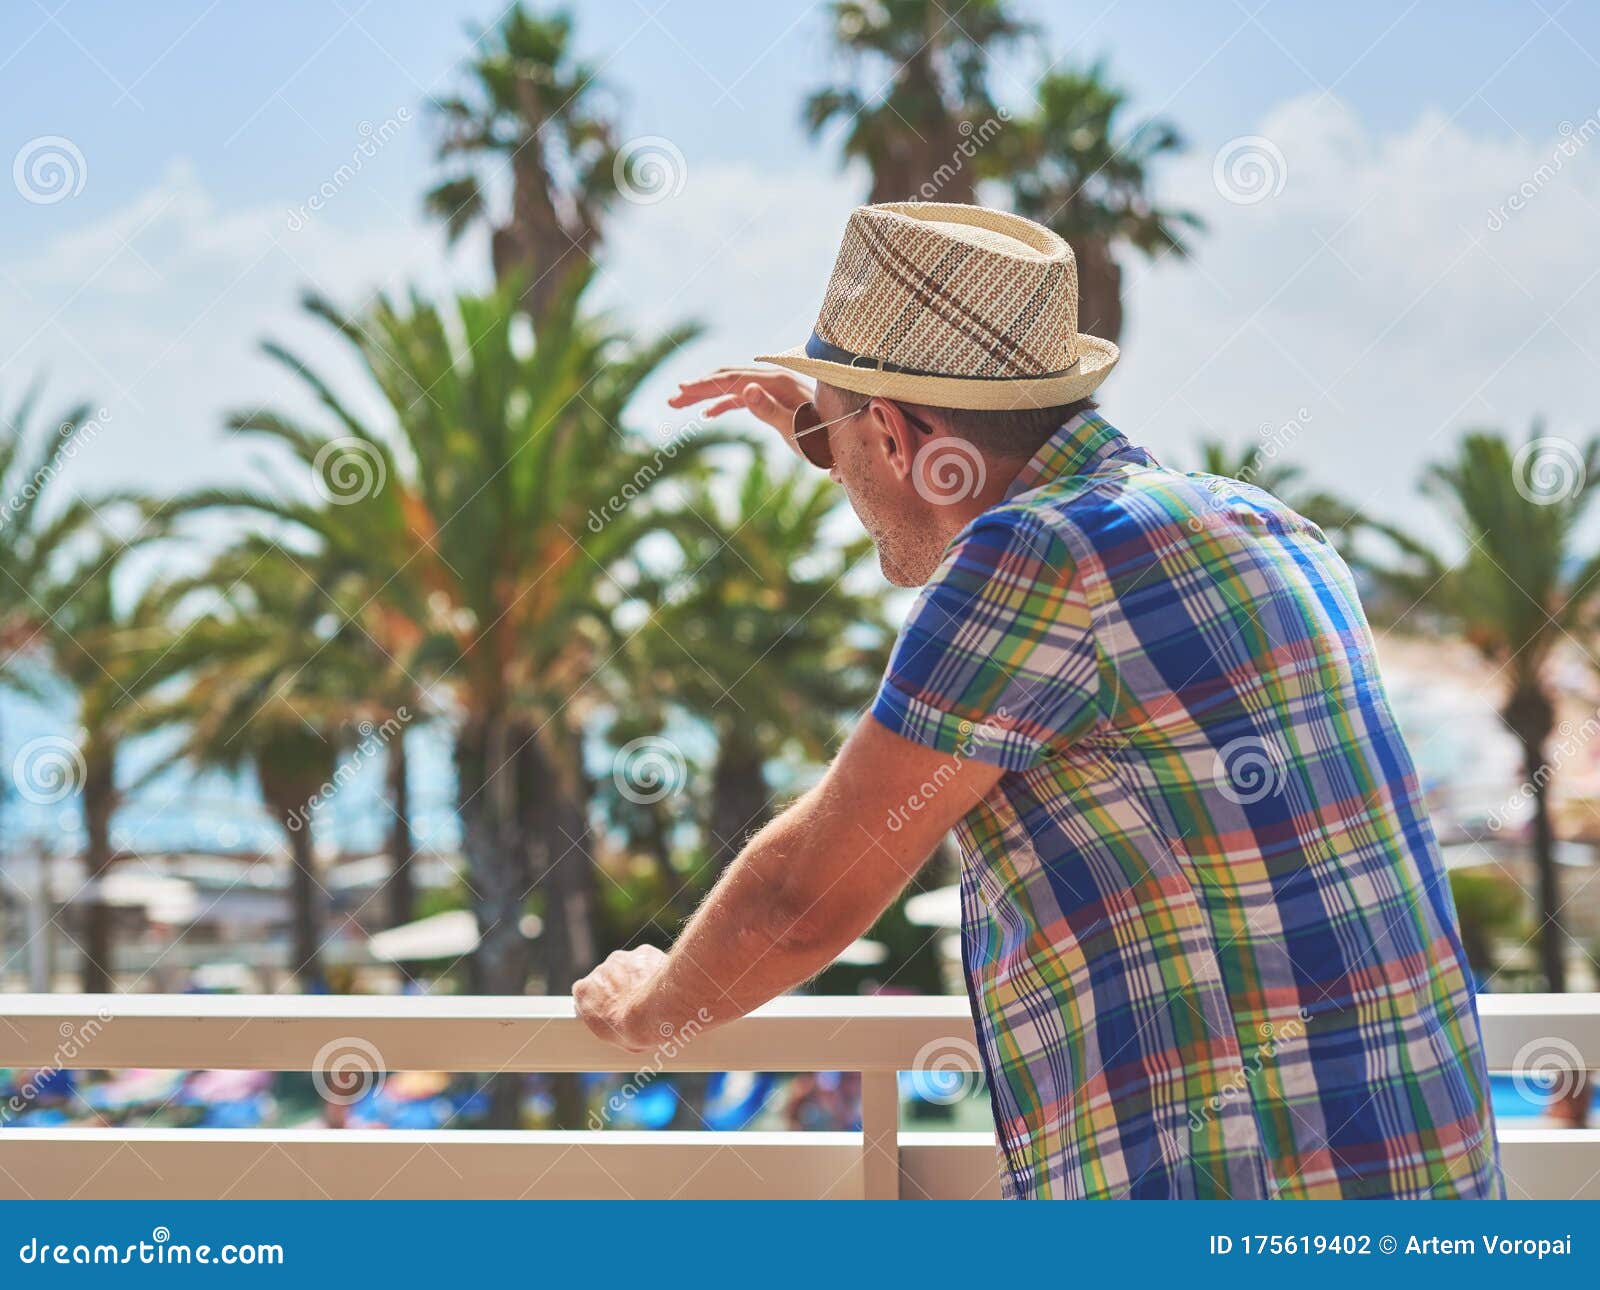 man in sunhat watching at picturesque sea view